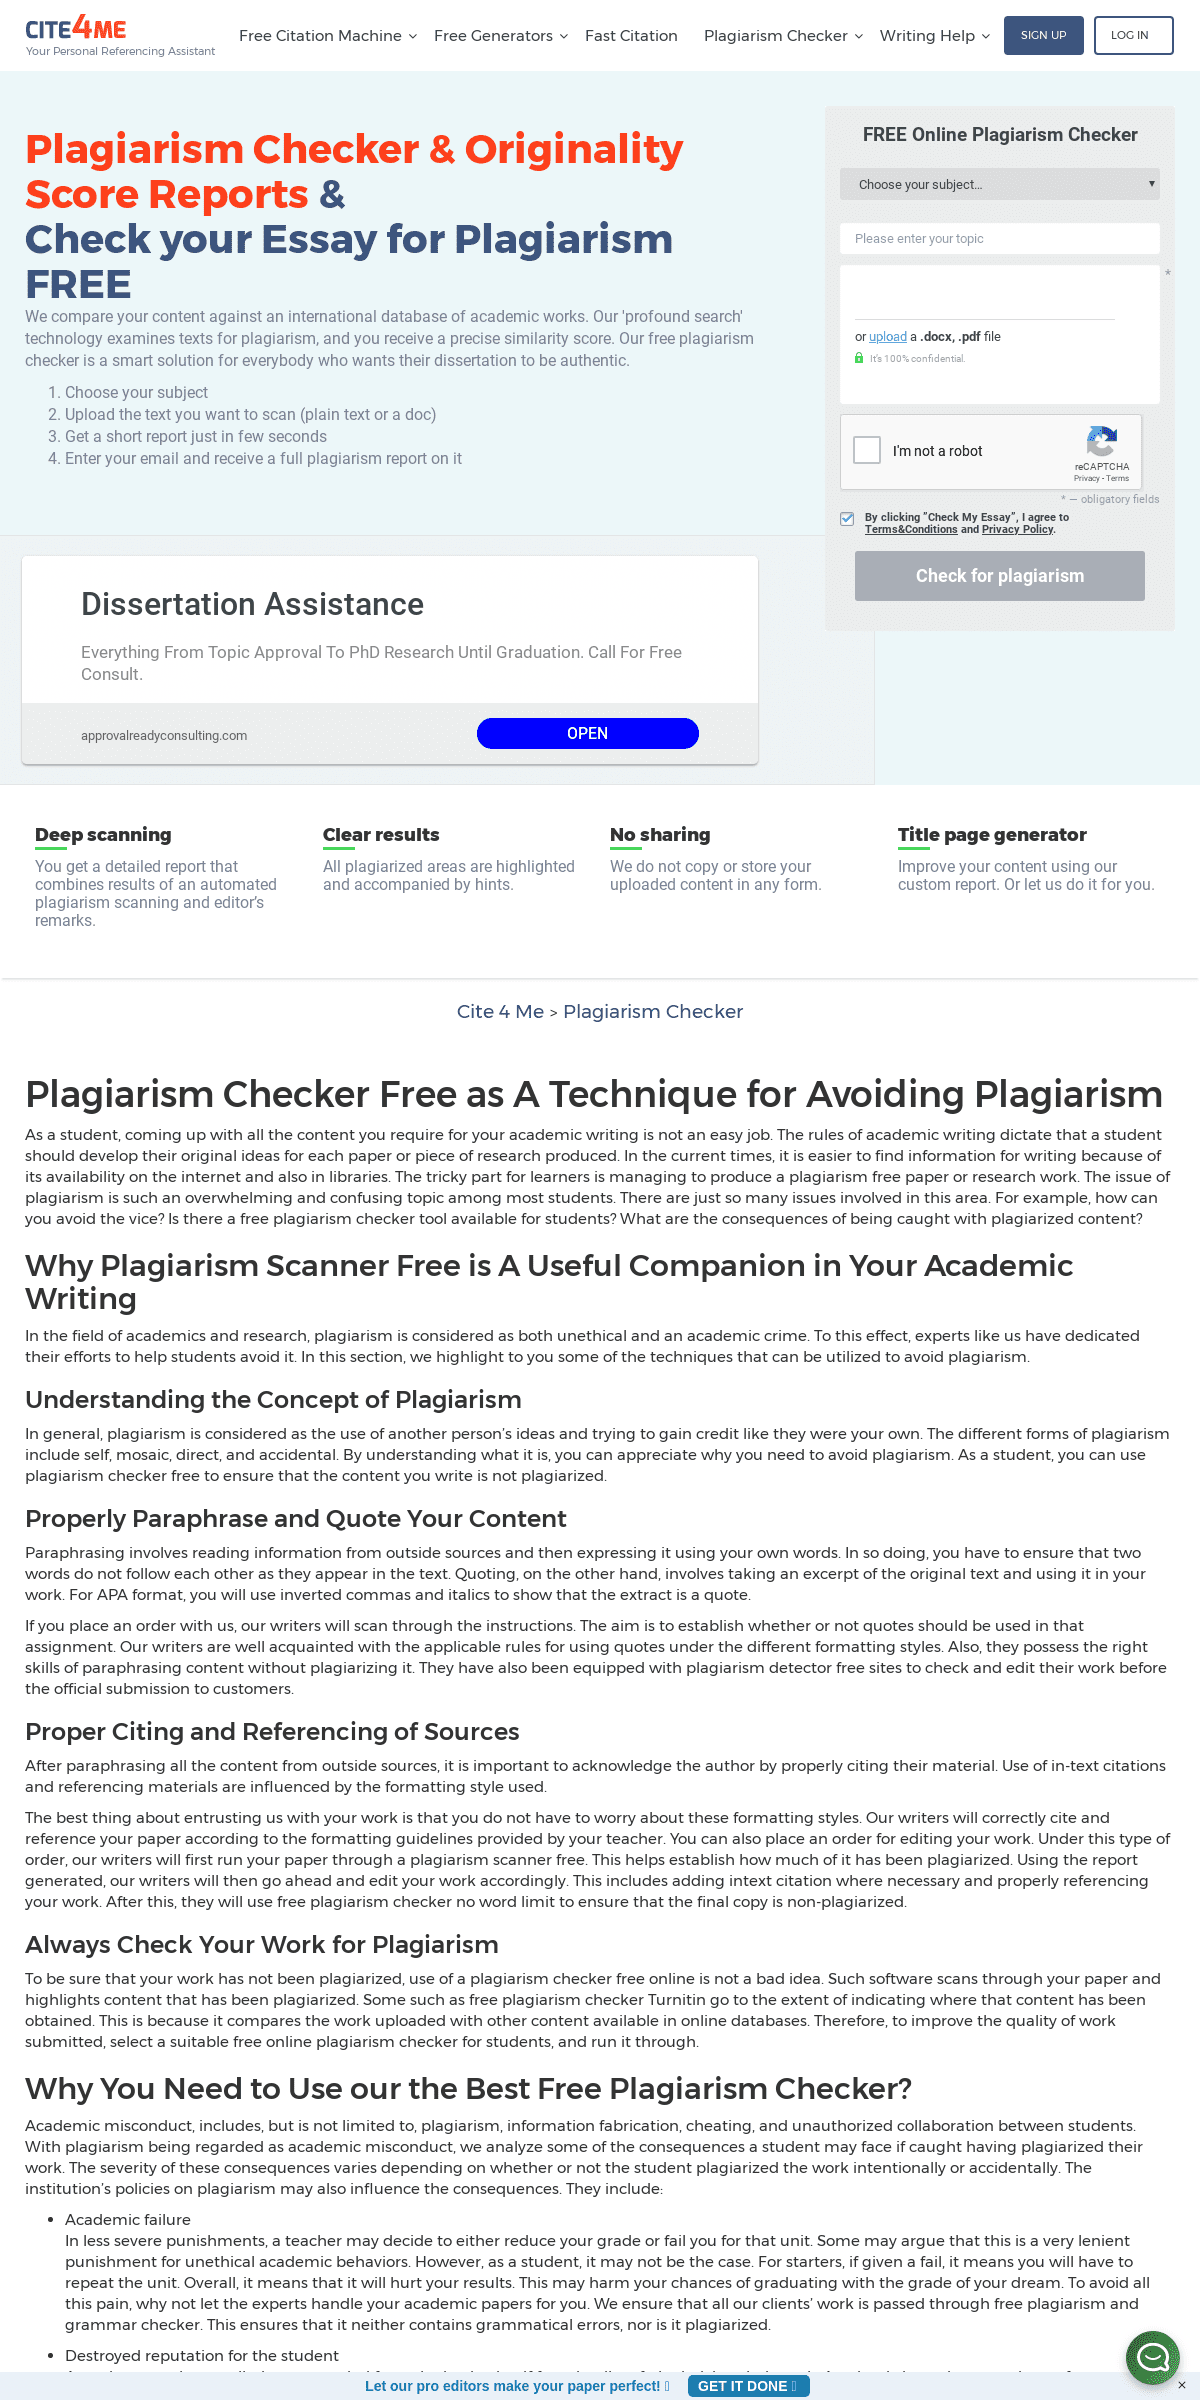 A complete backup of plagcheck.io